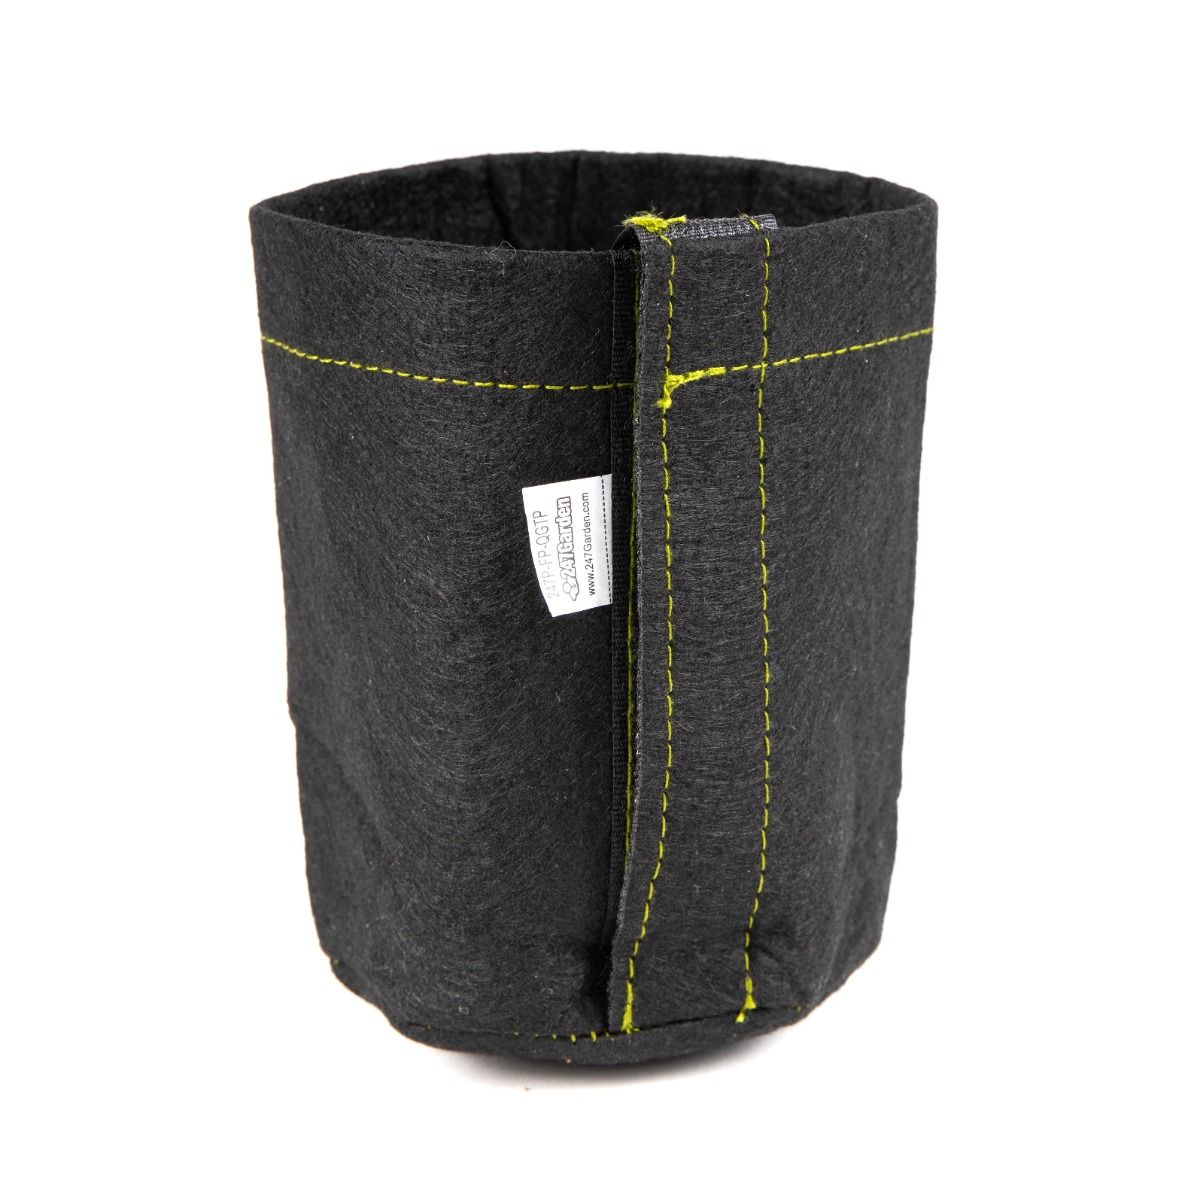 Planter Bag with Velcro